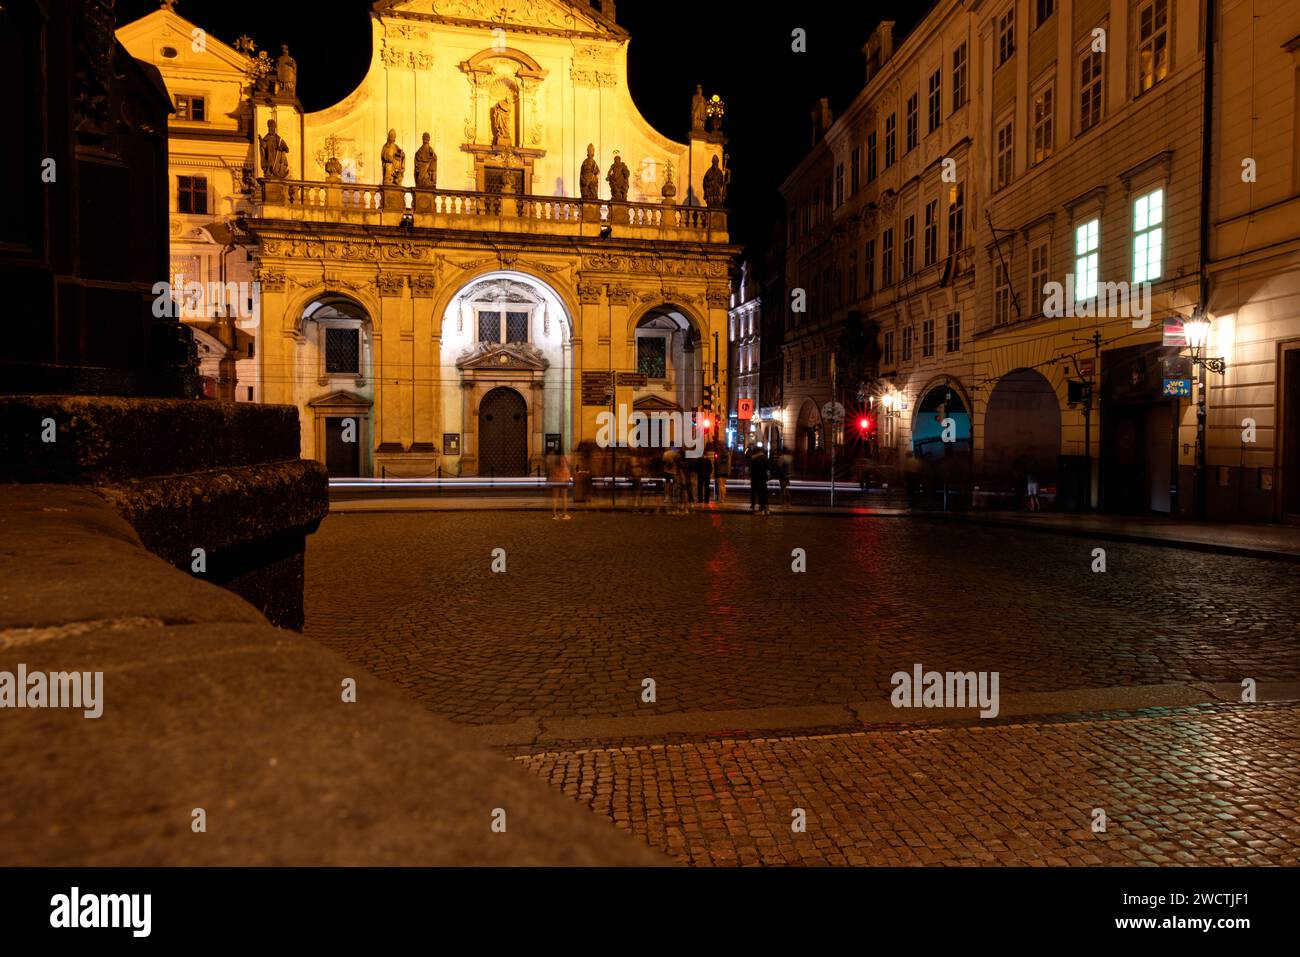 Photograph taken in Prague, Czech Republic, capturing a view of the classic and ancient monuments of the city Stock Photo